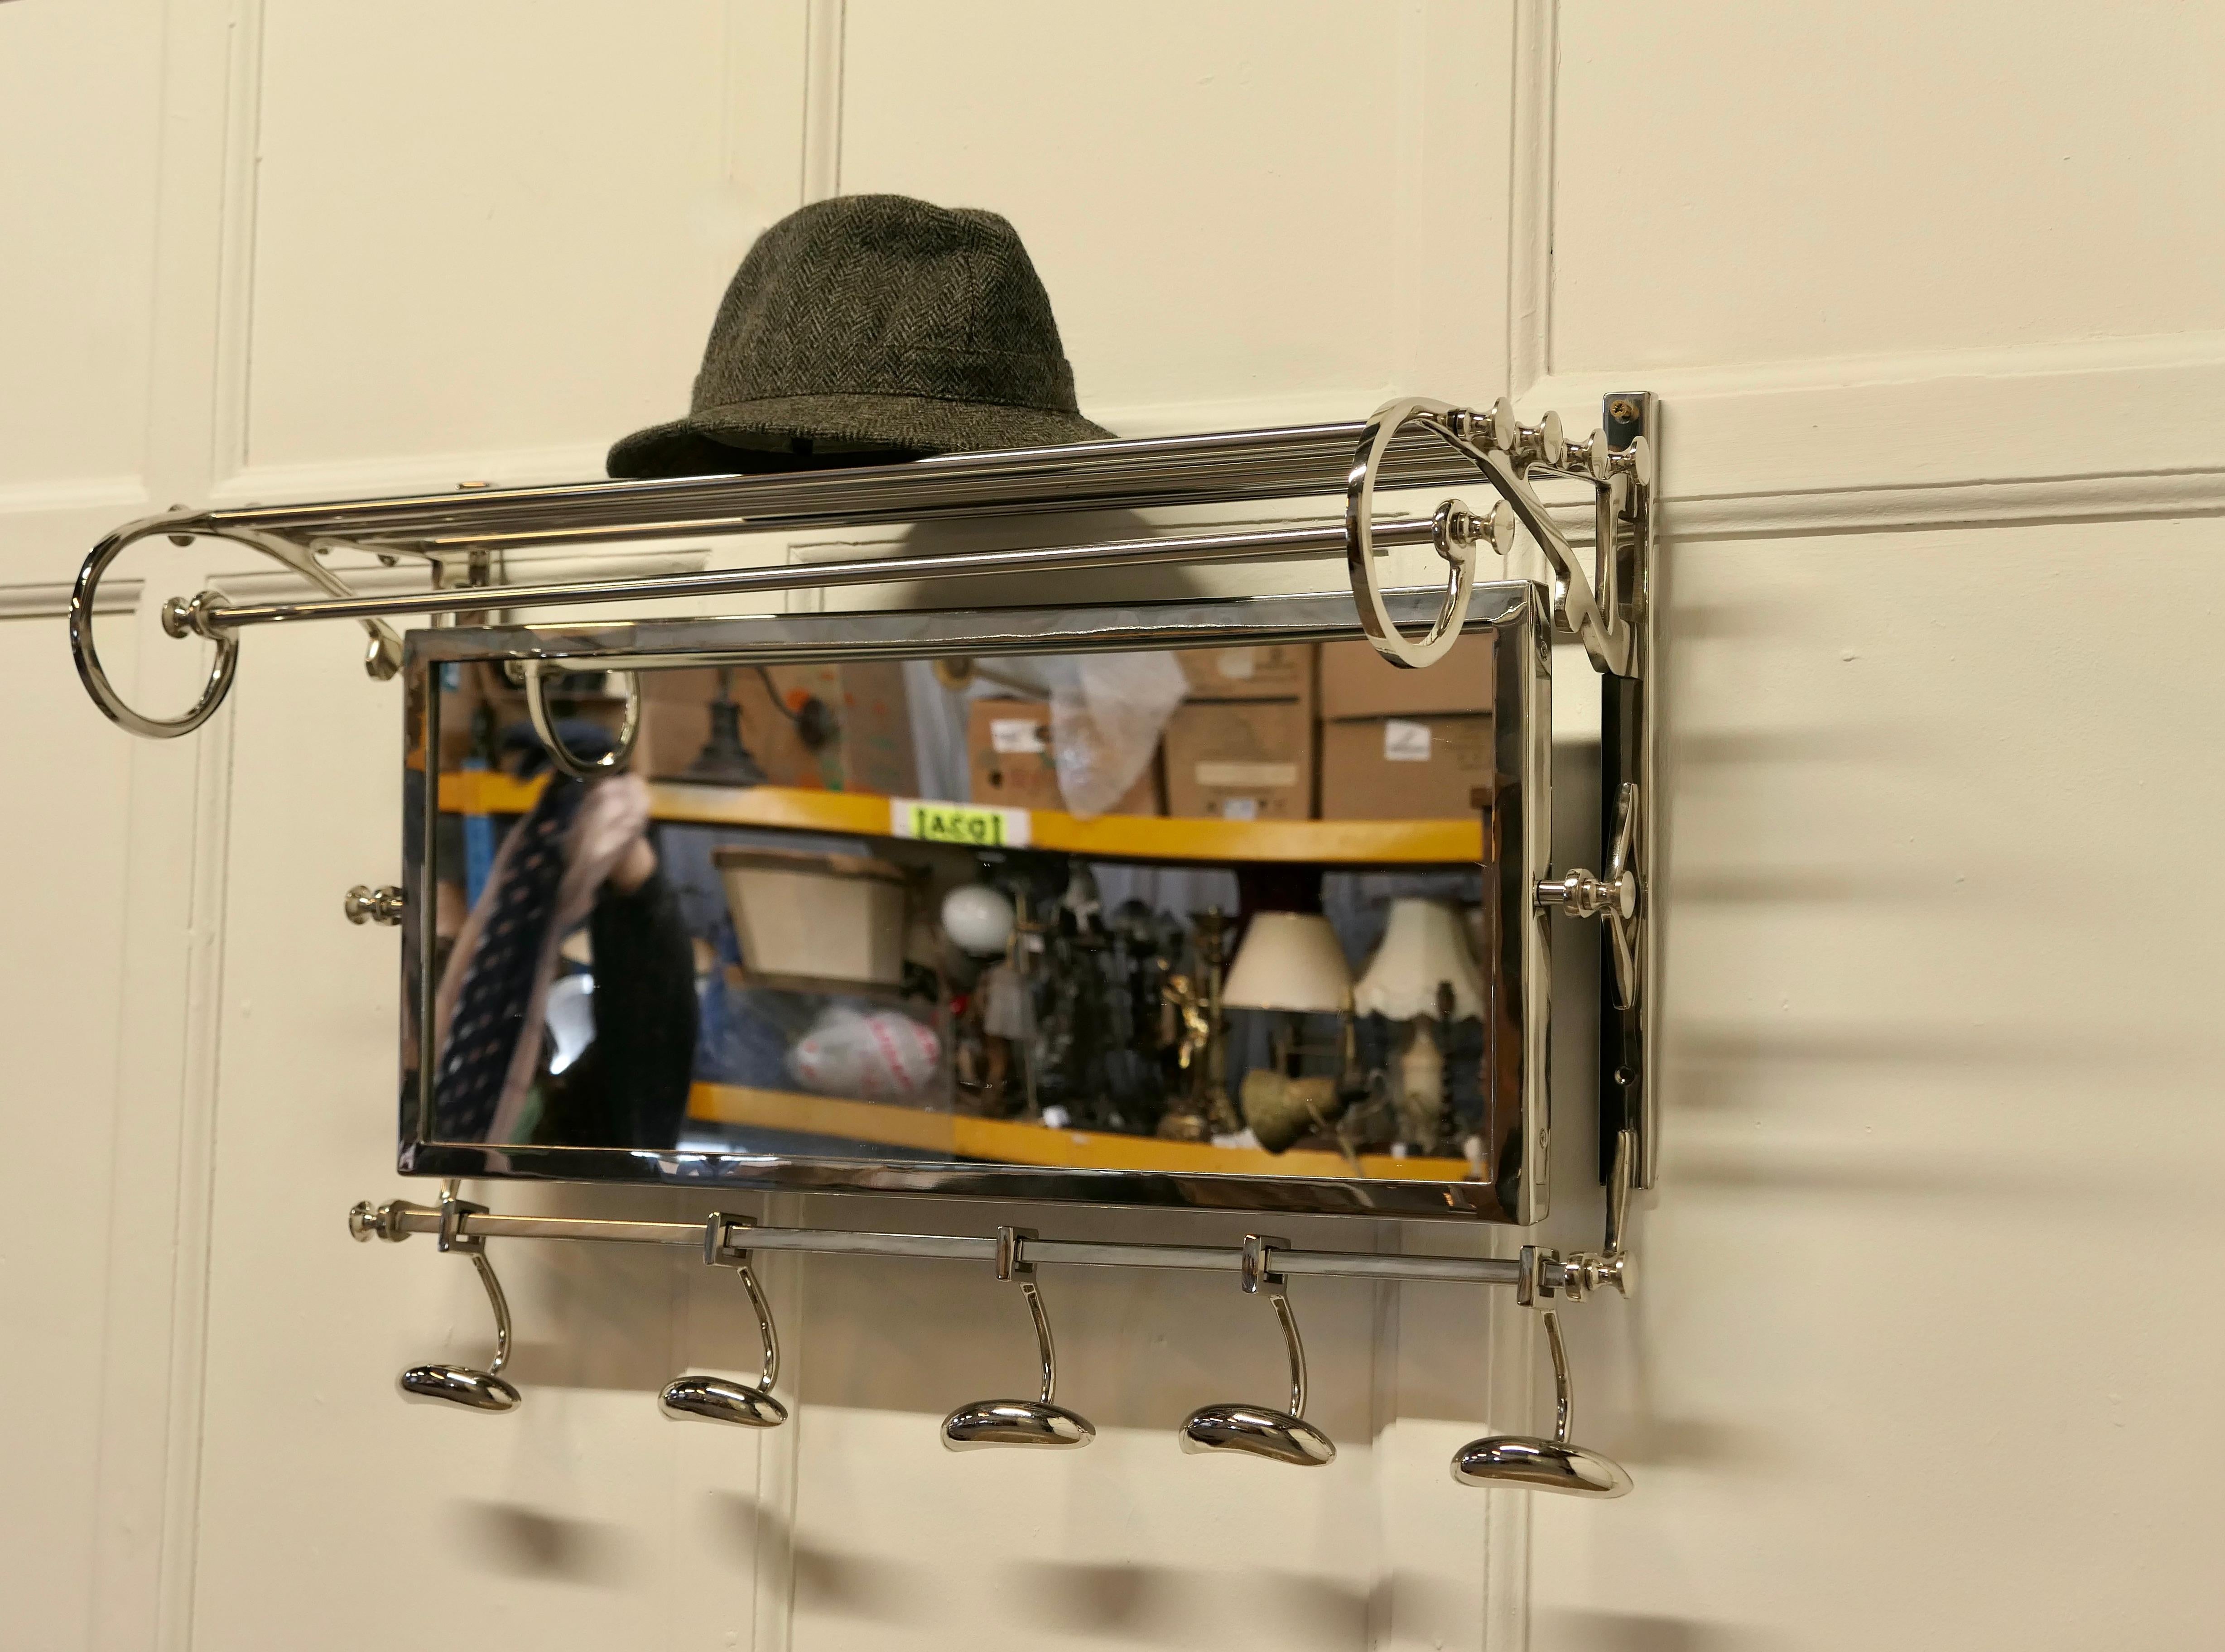 Chrome French Art Deco Style Hat and Coat Rack with Mirror, Pullman Railway Train Style